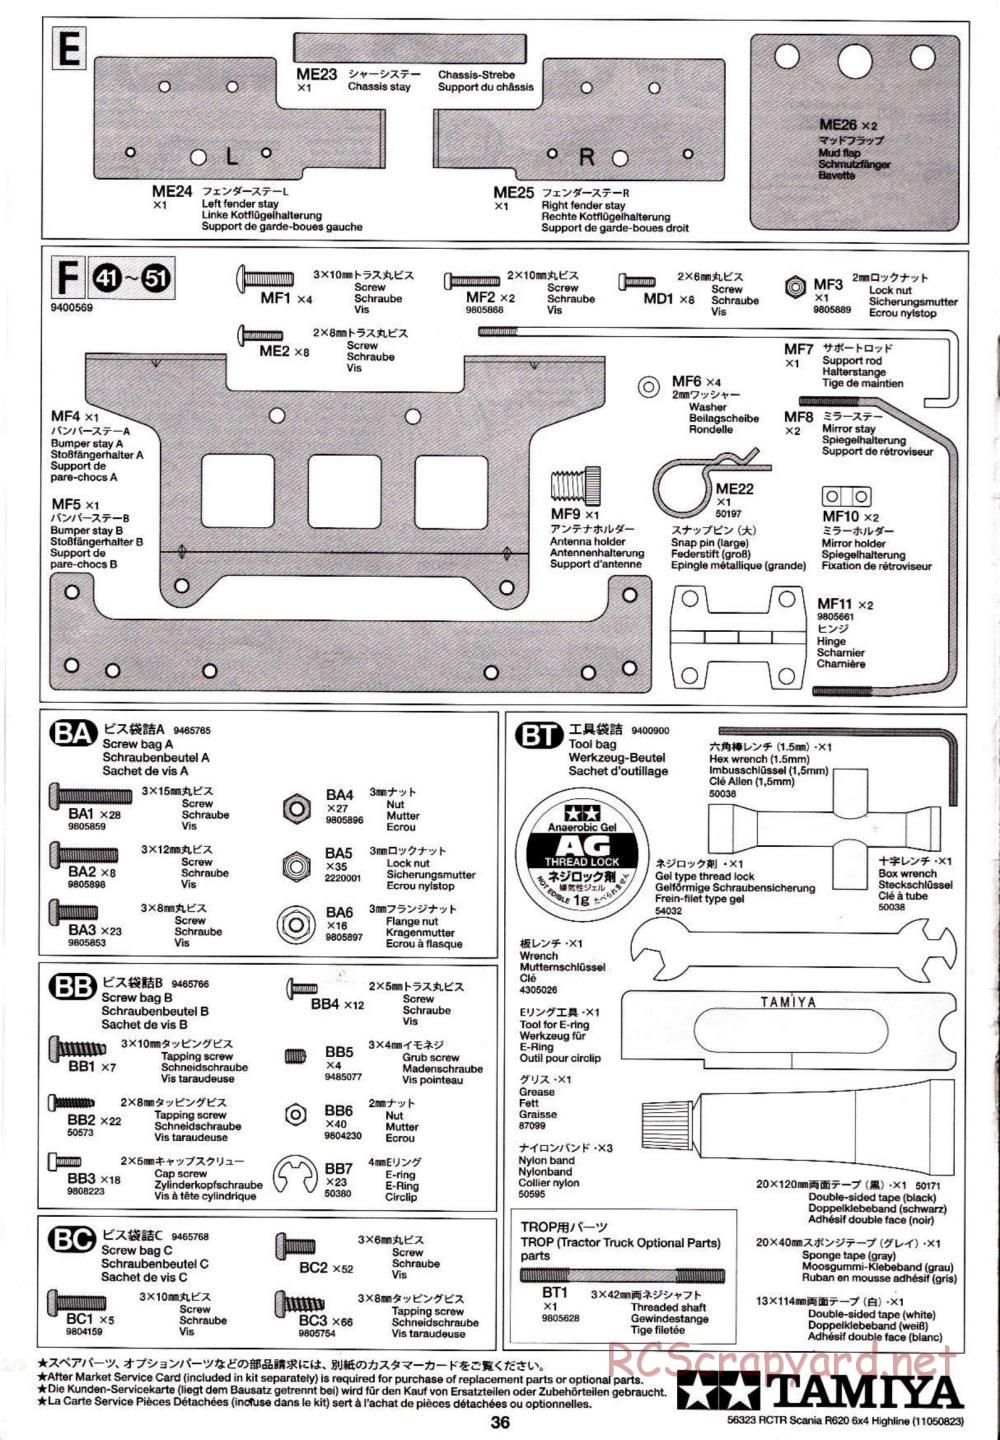 Tamiya - Scania R620 6x4 Highline Tractor Truck Chassis - Manual - Page 36